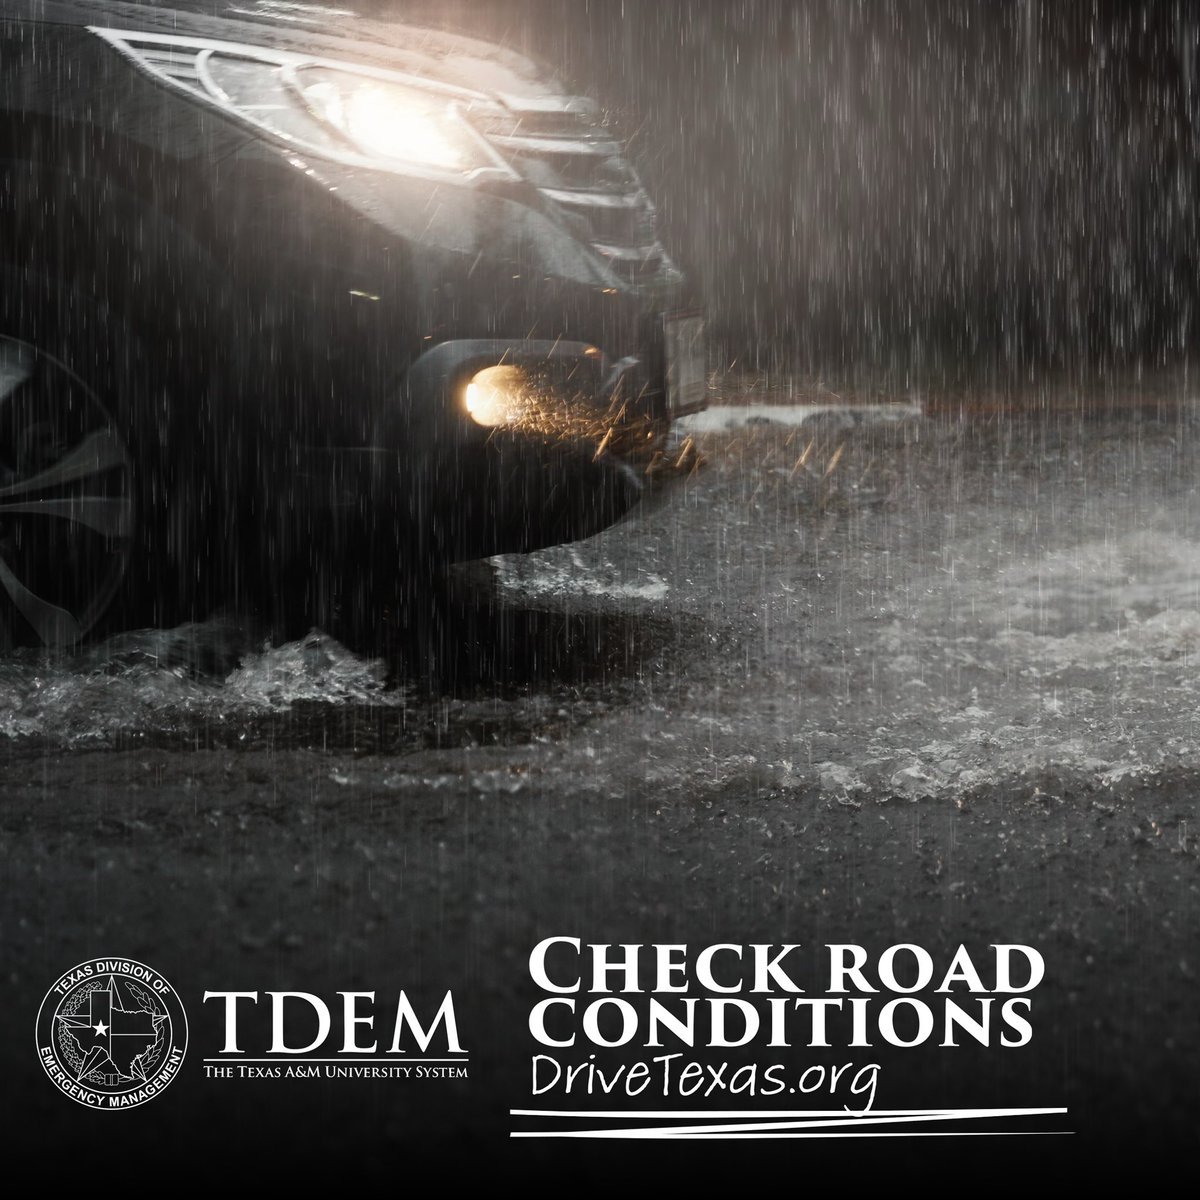 🌧️Driving through flood water is dangerous! 🌒In the dark, it's harder to gauge depth or spot hazards 🔦 Keep headlights on and drive with caution 🚫 Turn Around, Don't Drown Road Conditions: DriveTexas.org Stay safe—don't risk it!